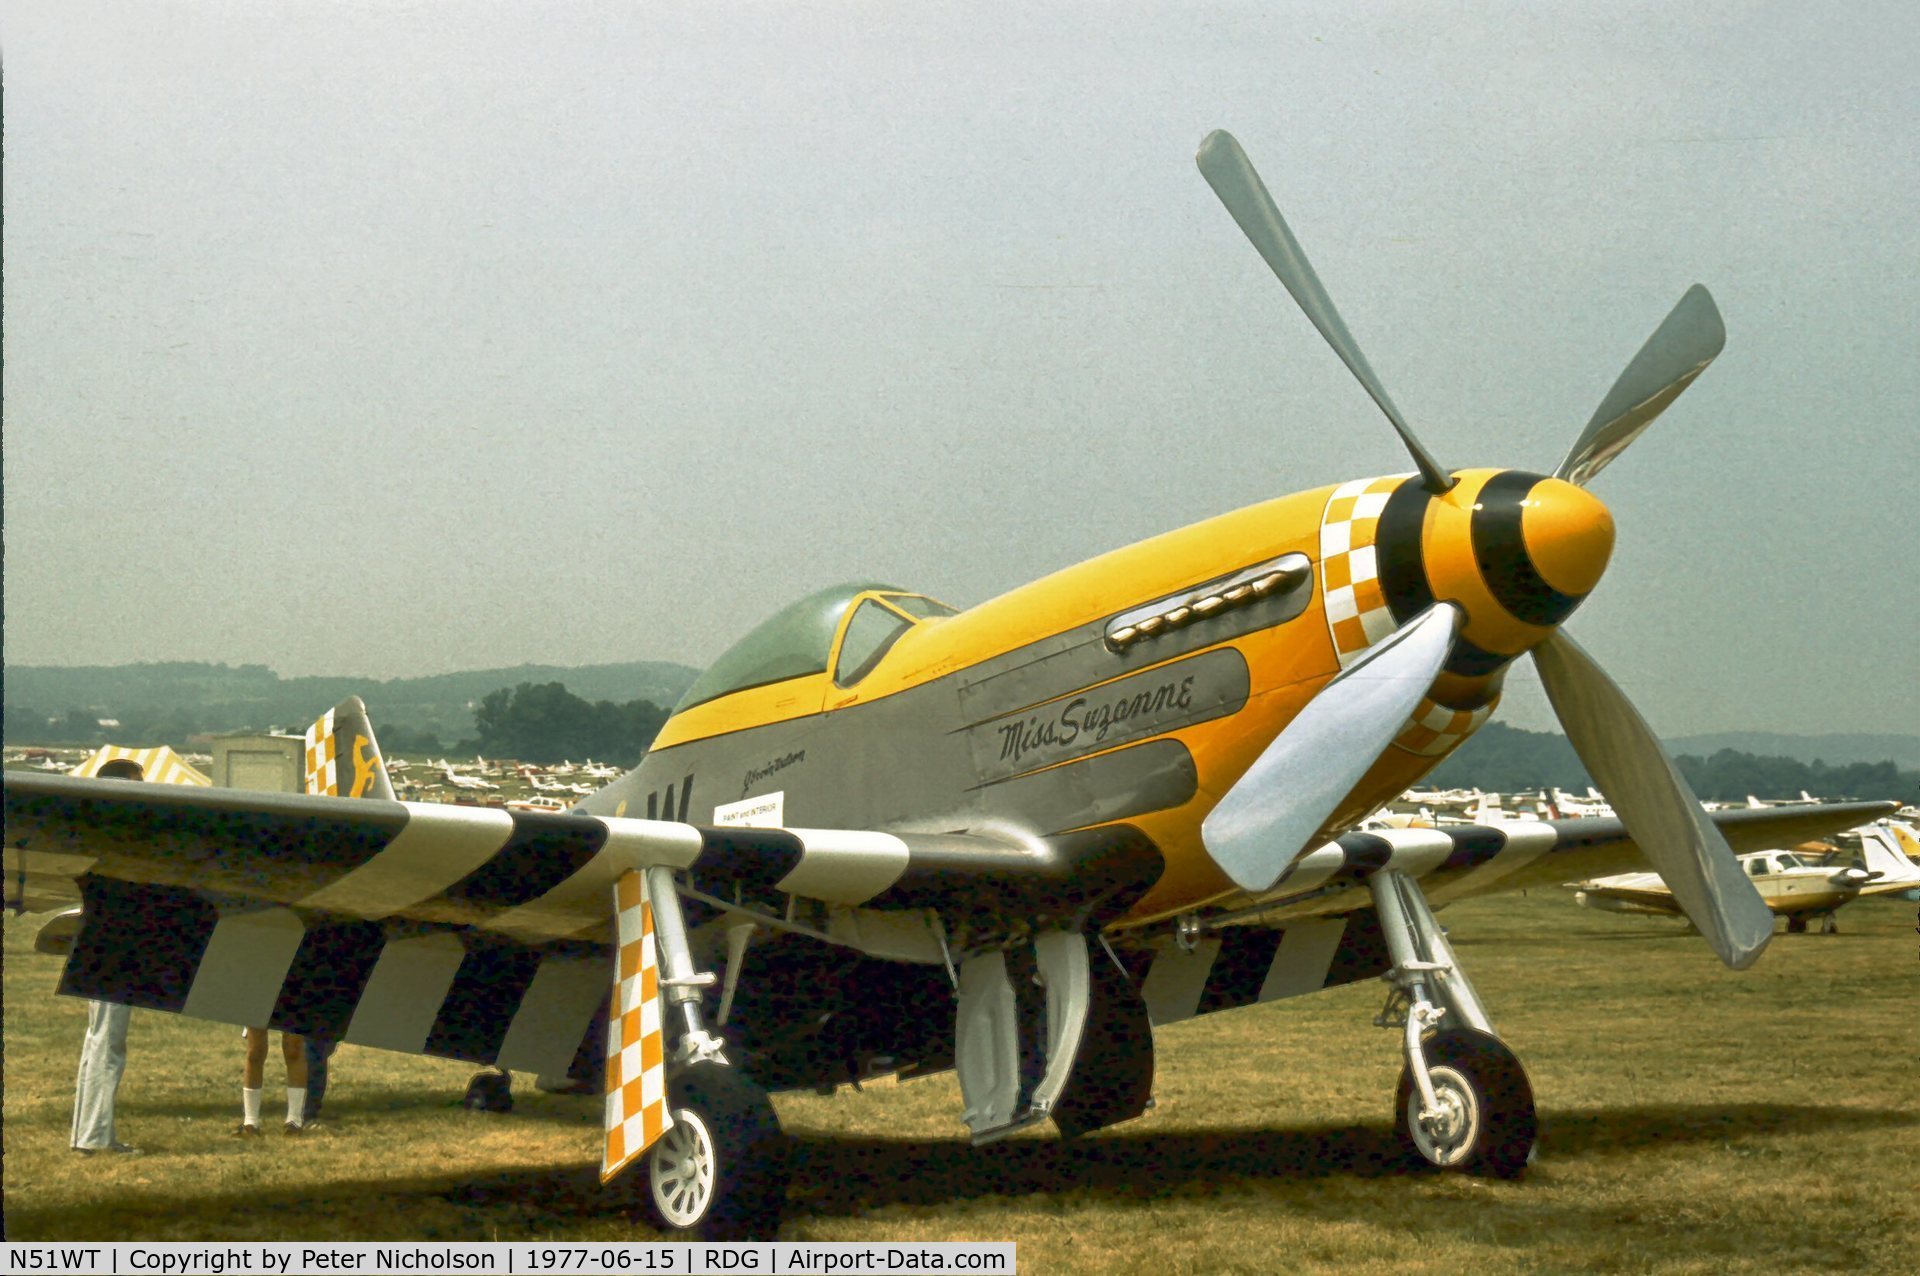 N51WT, 1945 North American P-51D Mustang C/N 124-48144, As Miss Suzanne at the 1977 Reading Airshow - later to become N51MV